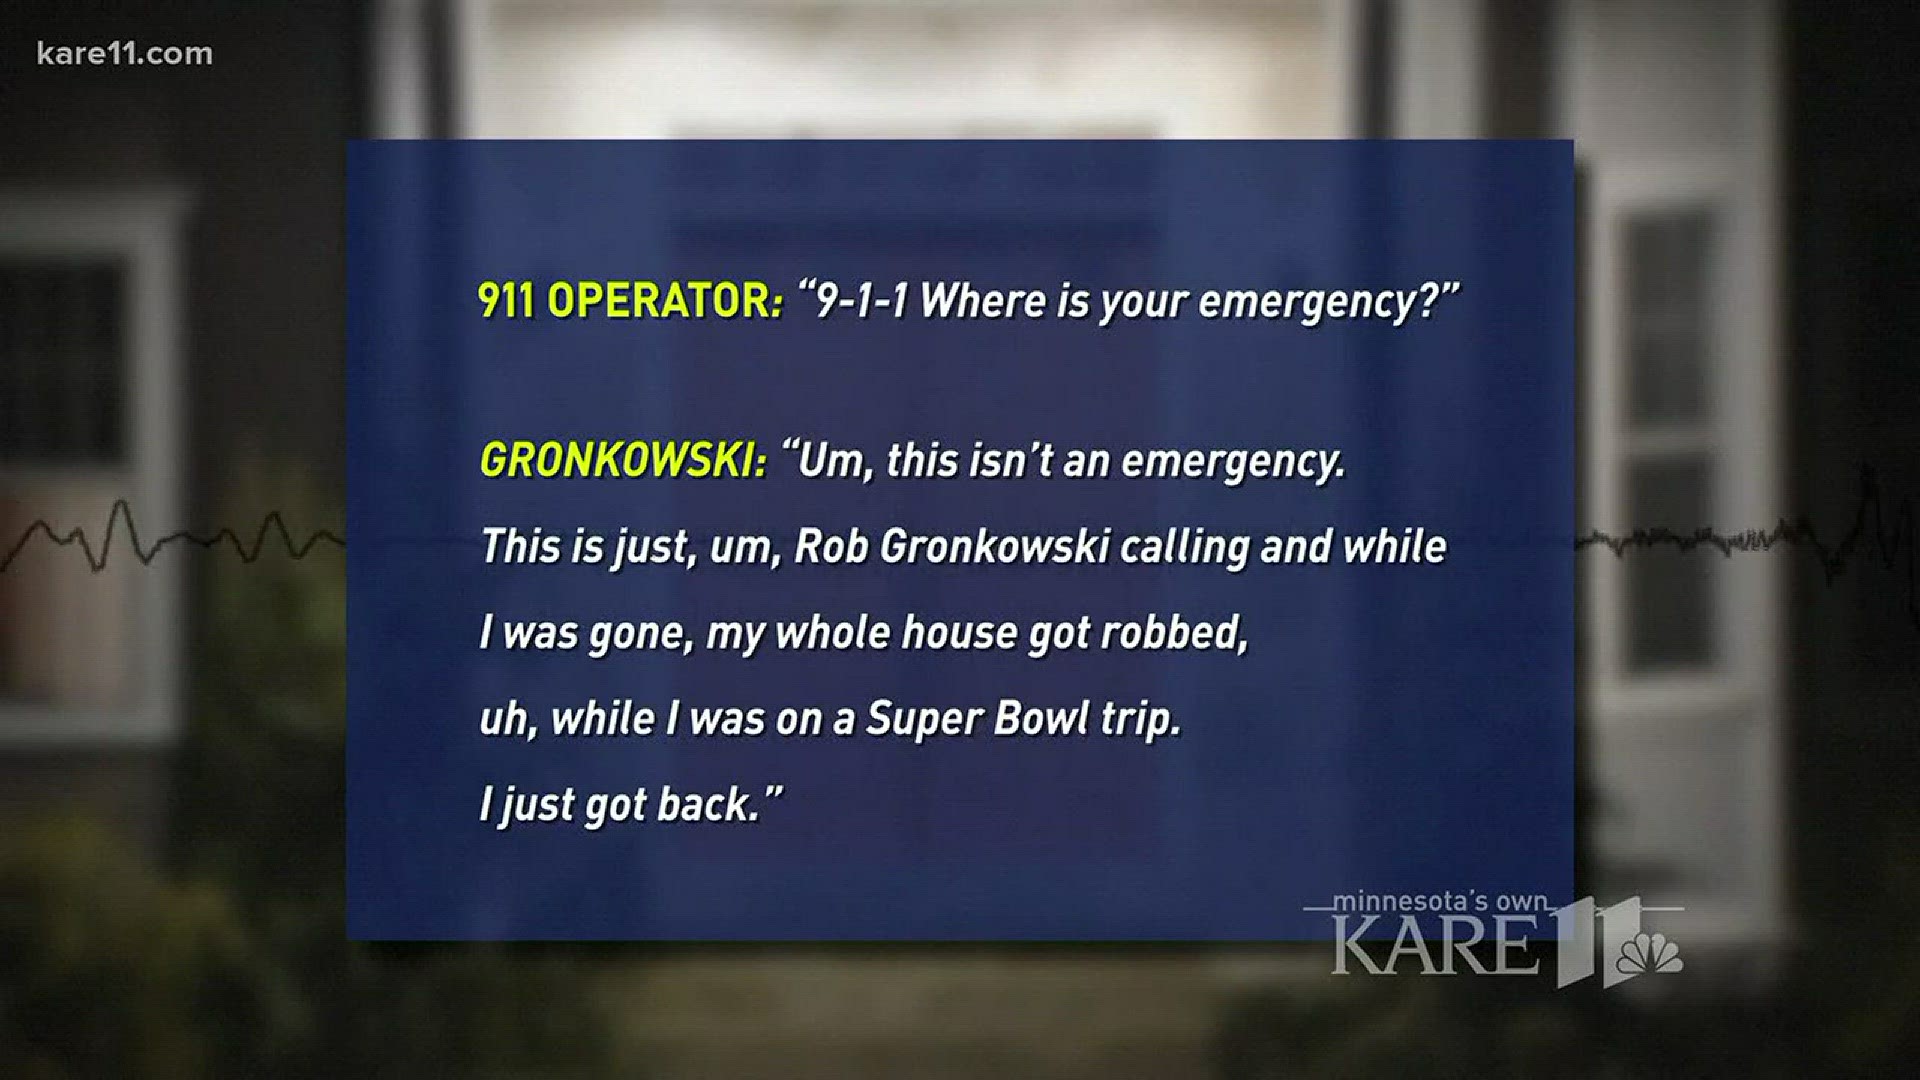 Police are investigating after New England Patriots star Rob Gronkowski's house was allegedly burglarized while he was in Minnesota for Super Bowl 52. http://kare11.tv/2FVOSO5